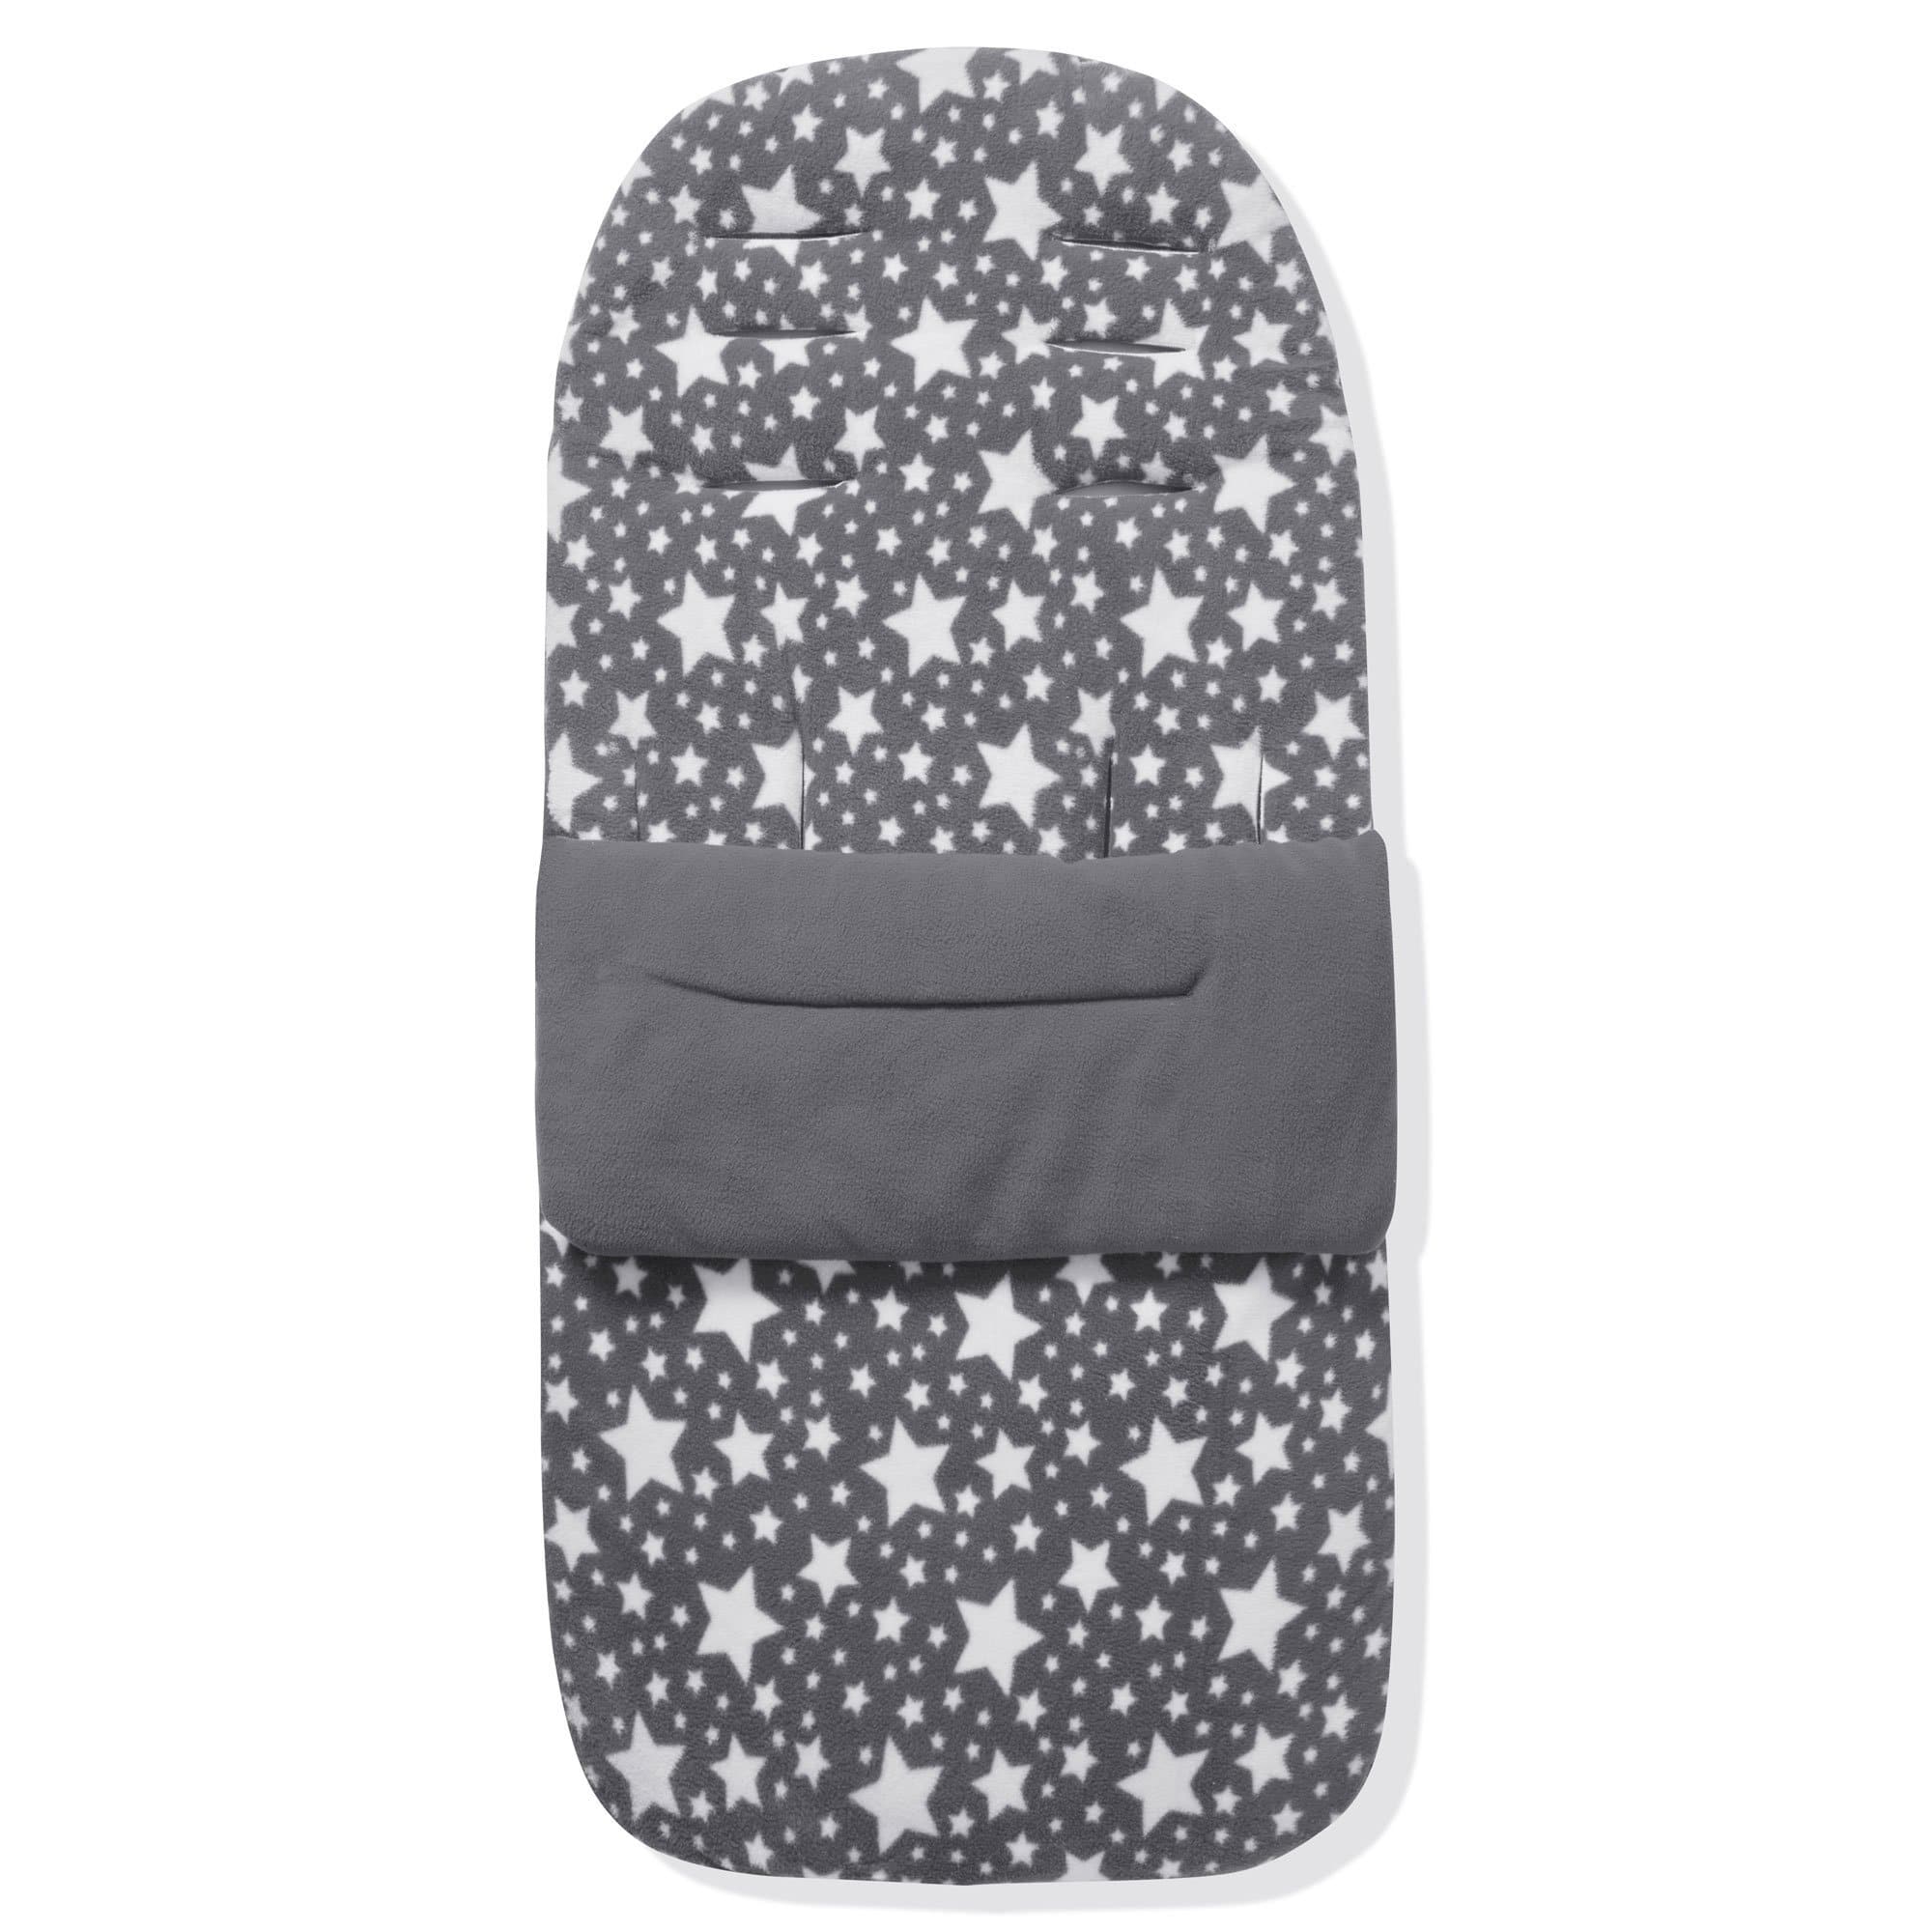 Fleece Footmuff / Cosy Toes Compatible With Bebe Confort - Grey Star / Fits All Models | For Your Little One